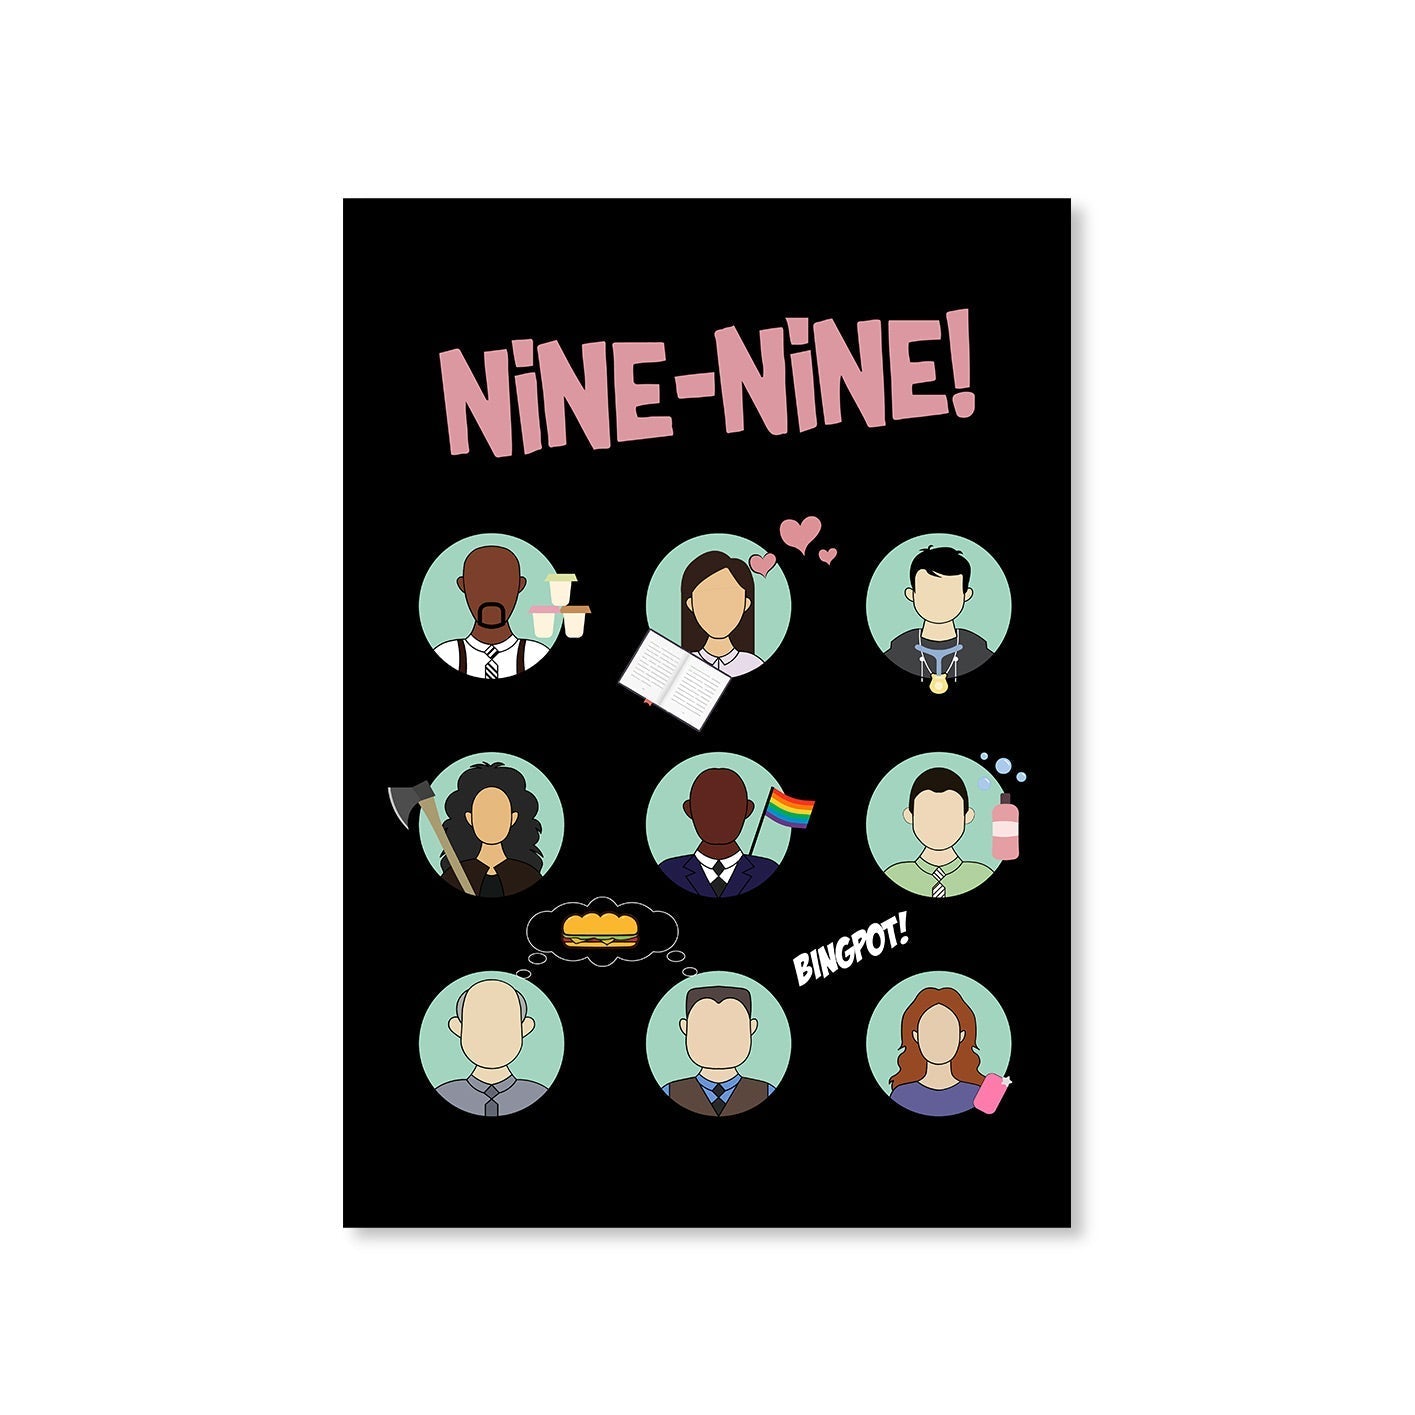 brooklyn nine-nine nine-nine poster wall art buy online united states of america usa the banyan tee tbt a4 detective jake peralta terry charles boyle gina linetti andy samberg merchandise clothing acceessories